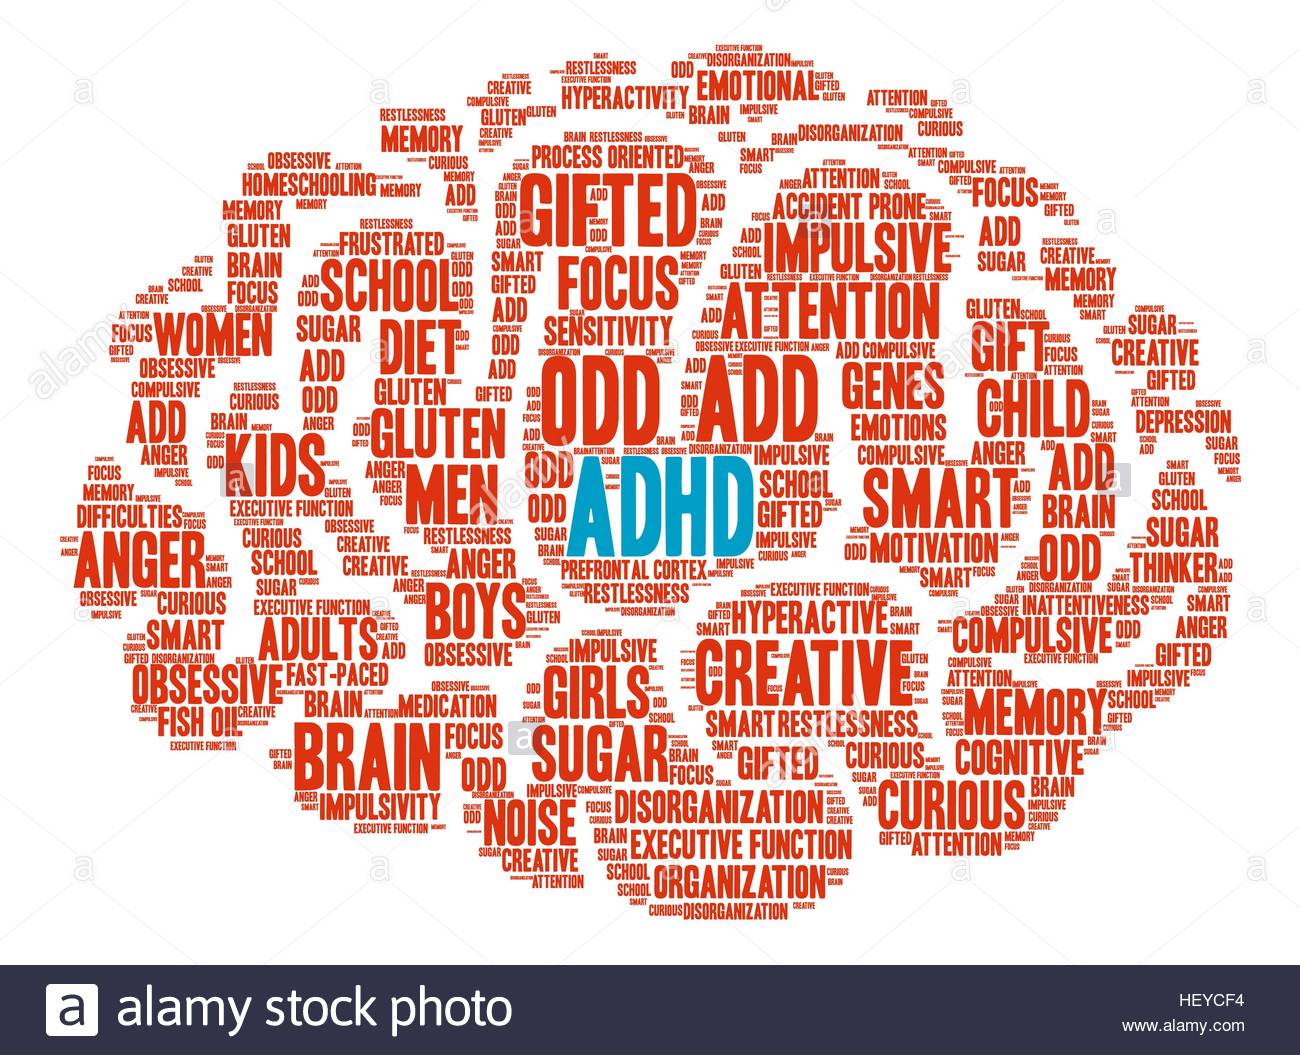 AdHD Brain Word Cloud On A White Background Stock Vector Art